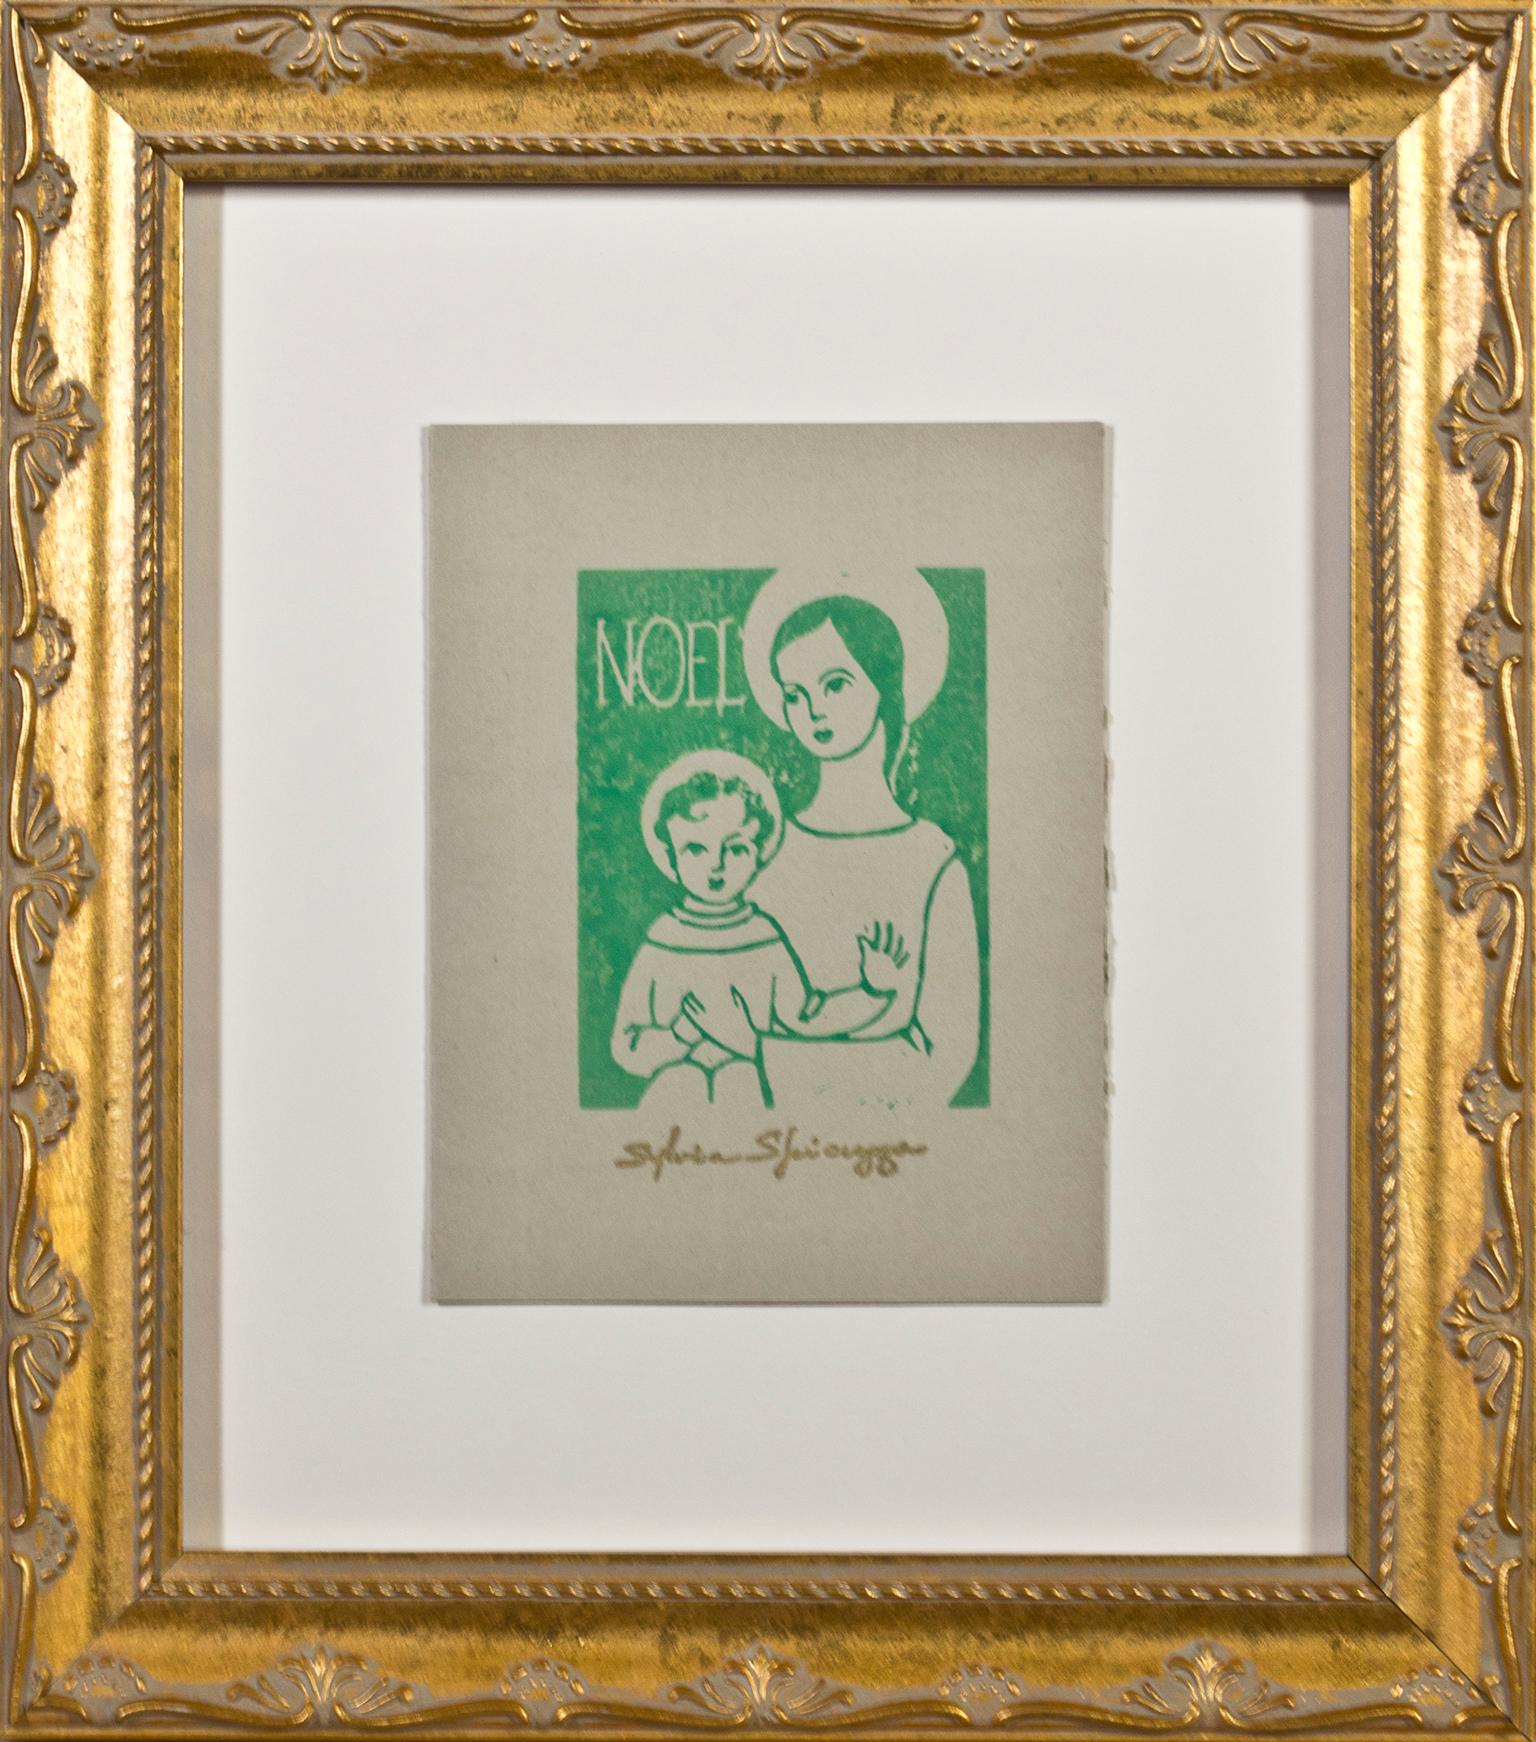 "Noel" is an original linocut in green ink on tan paper by Sylvia Spicuzza. The artist stamped her signature lower center. This artwork features the Virgin Mary holding the baby Jesus. Both figures are simplified. 

6 1/2" x 5" art
12 3/4" x 11 1/4"